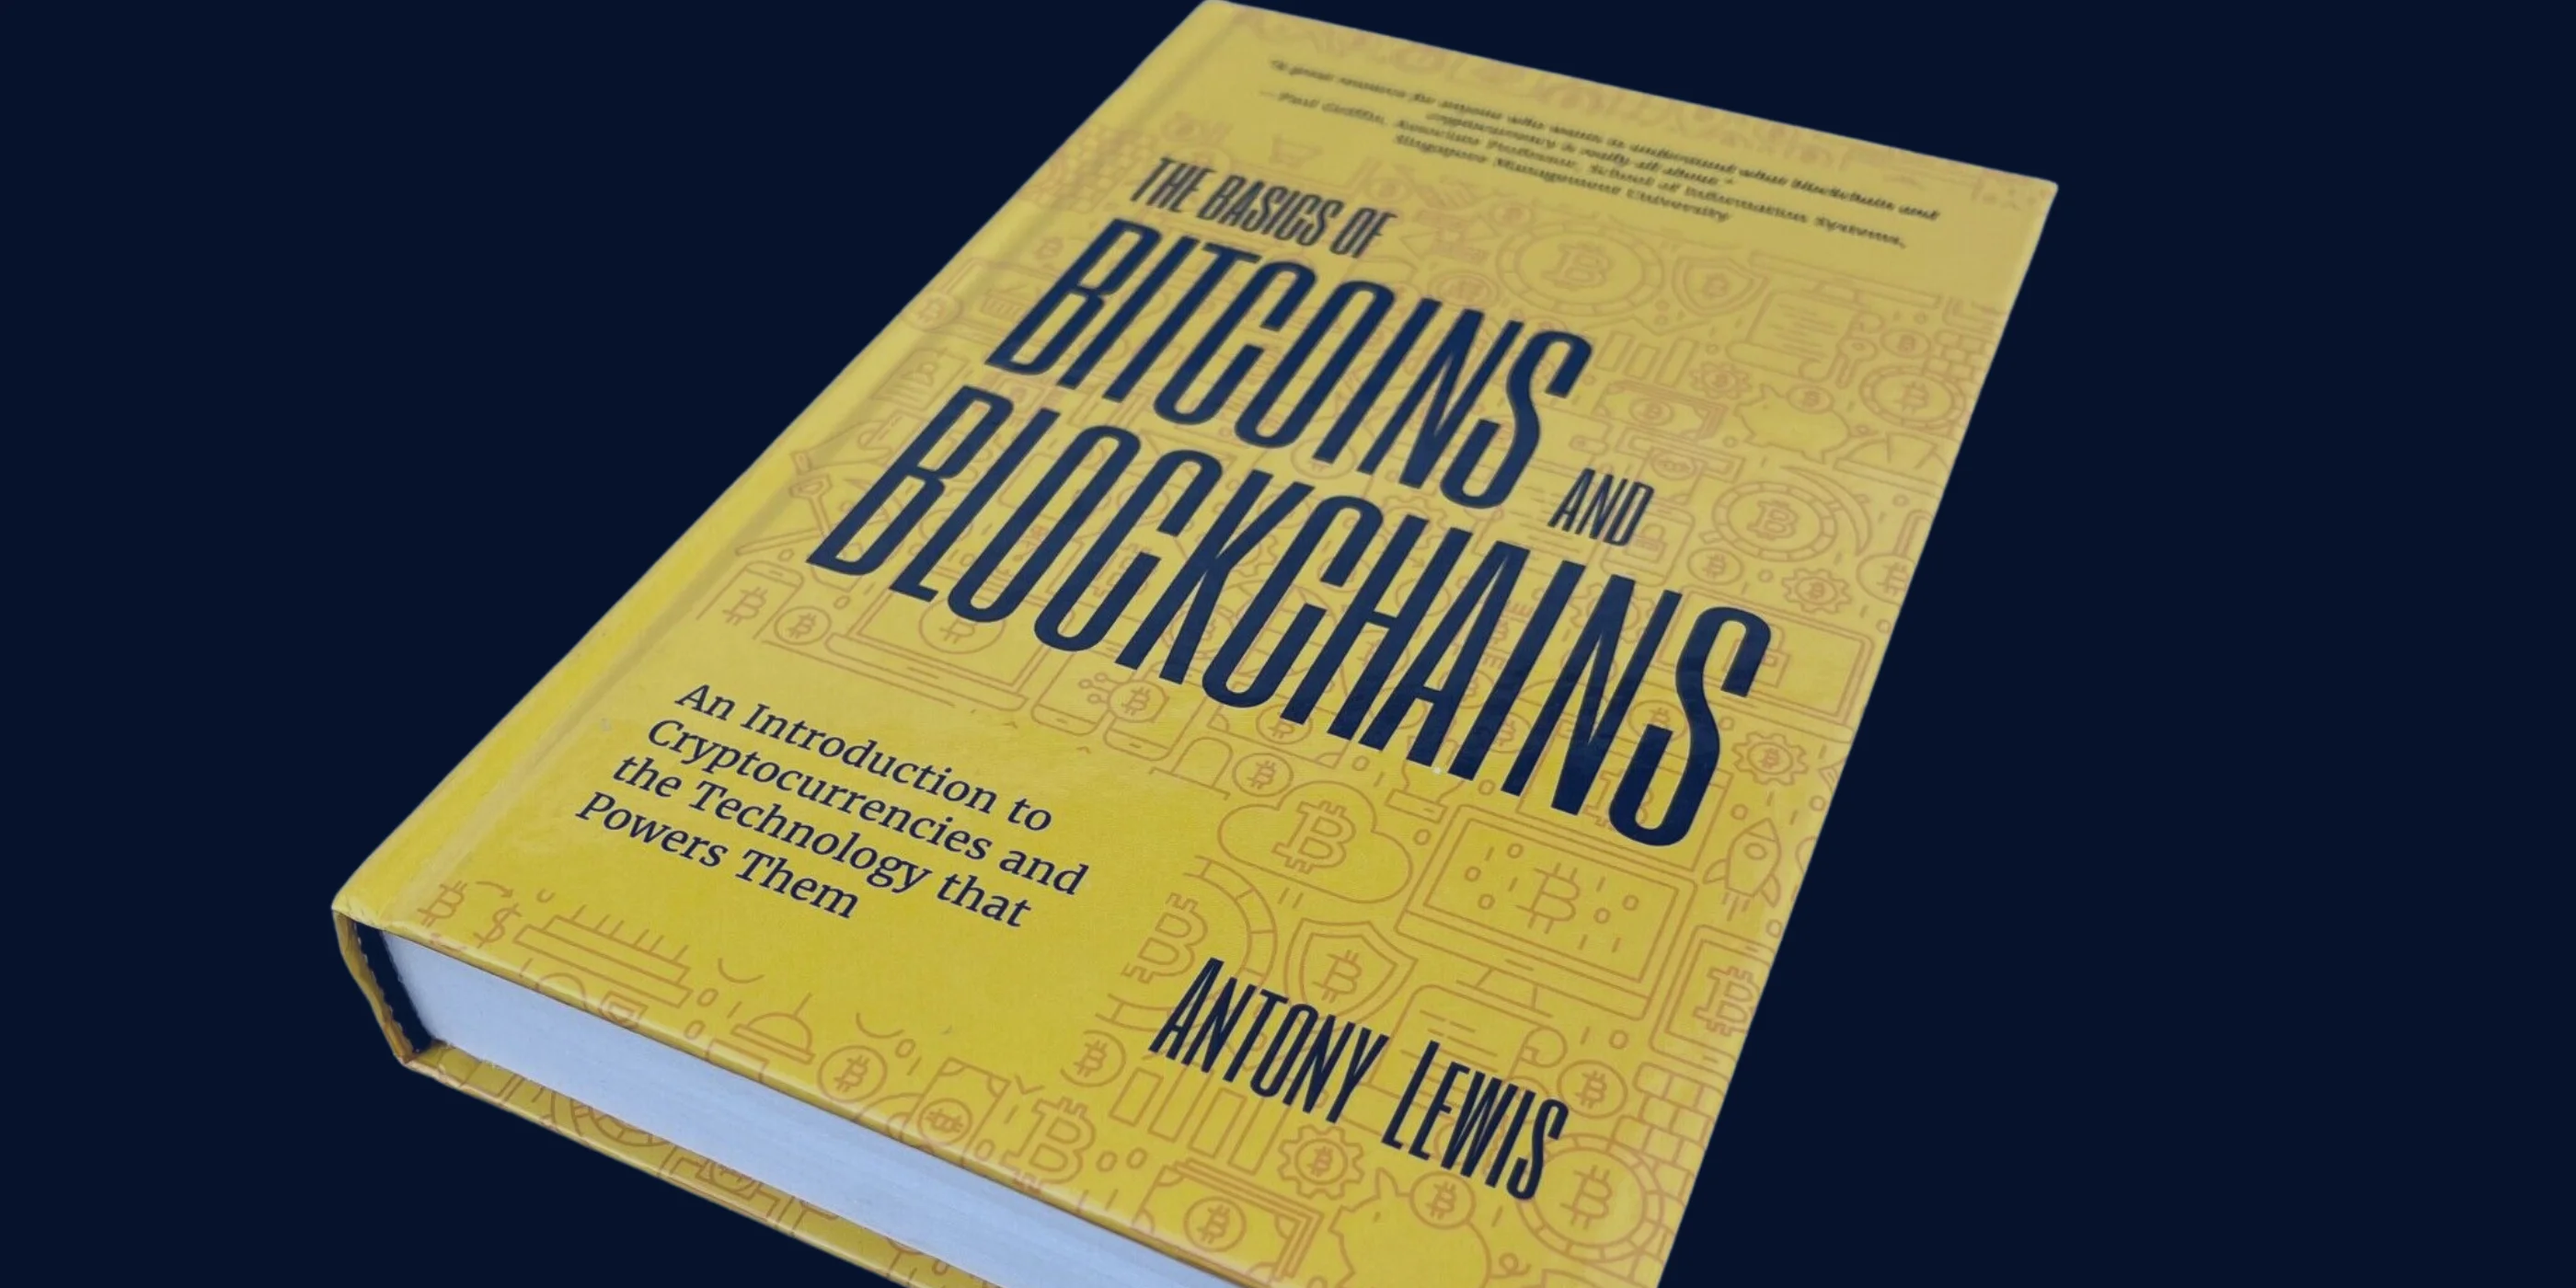 basics of bitcoins and blockchains book cover